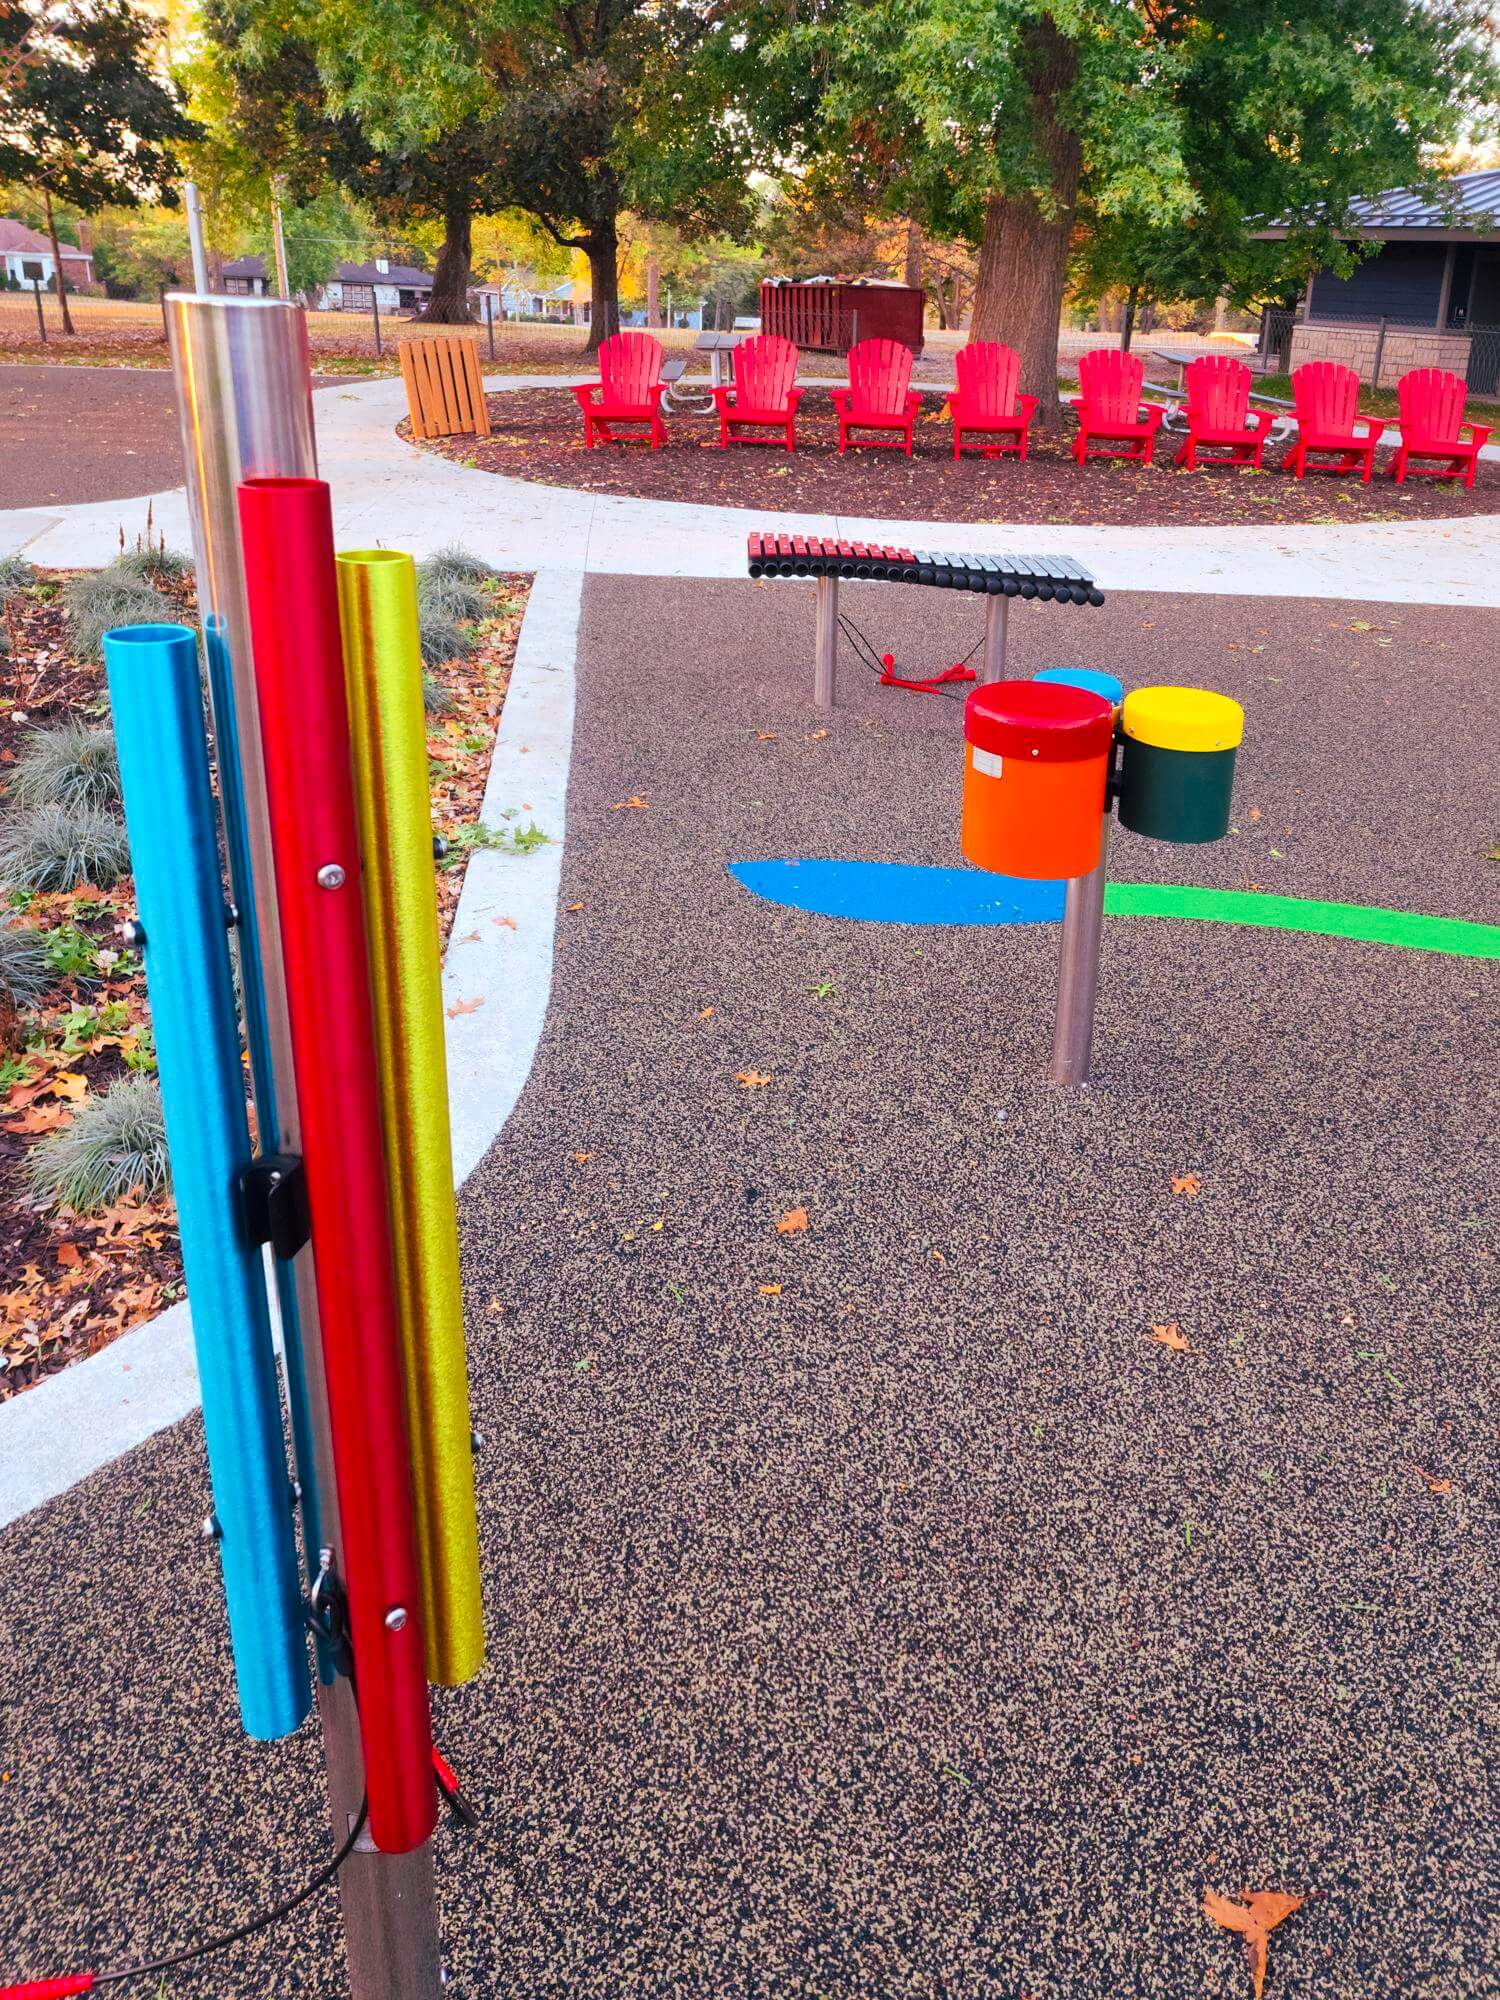 A vibrant playground with colorful chimes and drums in the foreground, and red Adirondack chairs arranged around a fire pit in the background, set against an autumnal tree line.